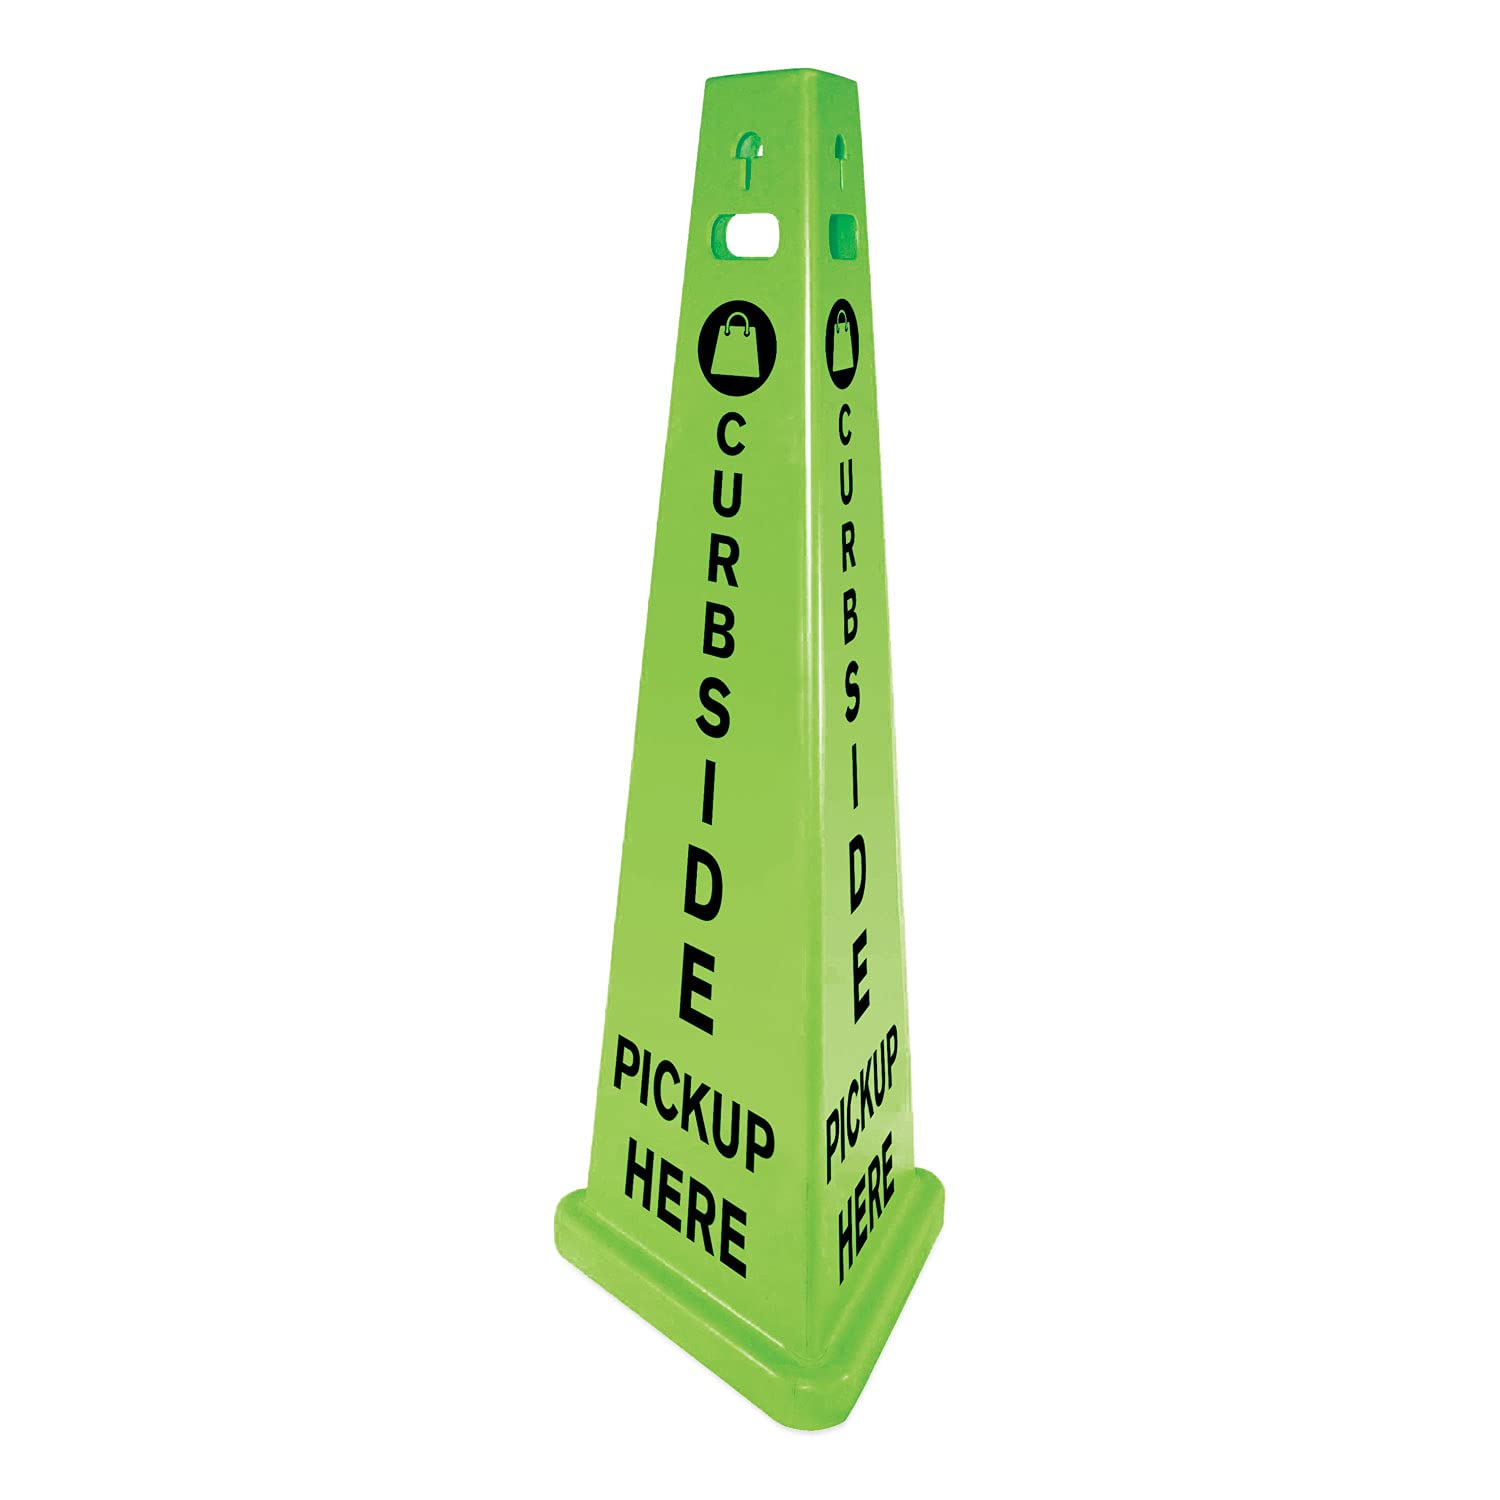 TriVu 3-Sided Curbside Pickup Here Sign, Fluorescent Green, 14.75 x 12.7 x 40, Plastic